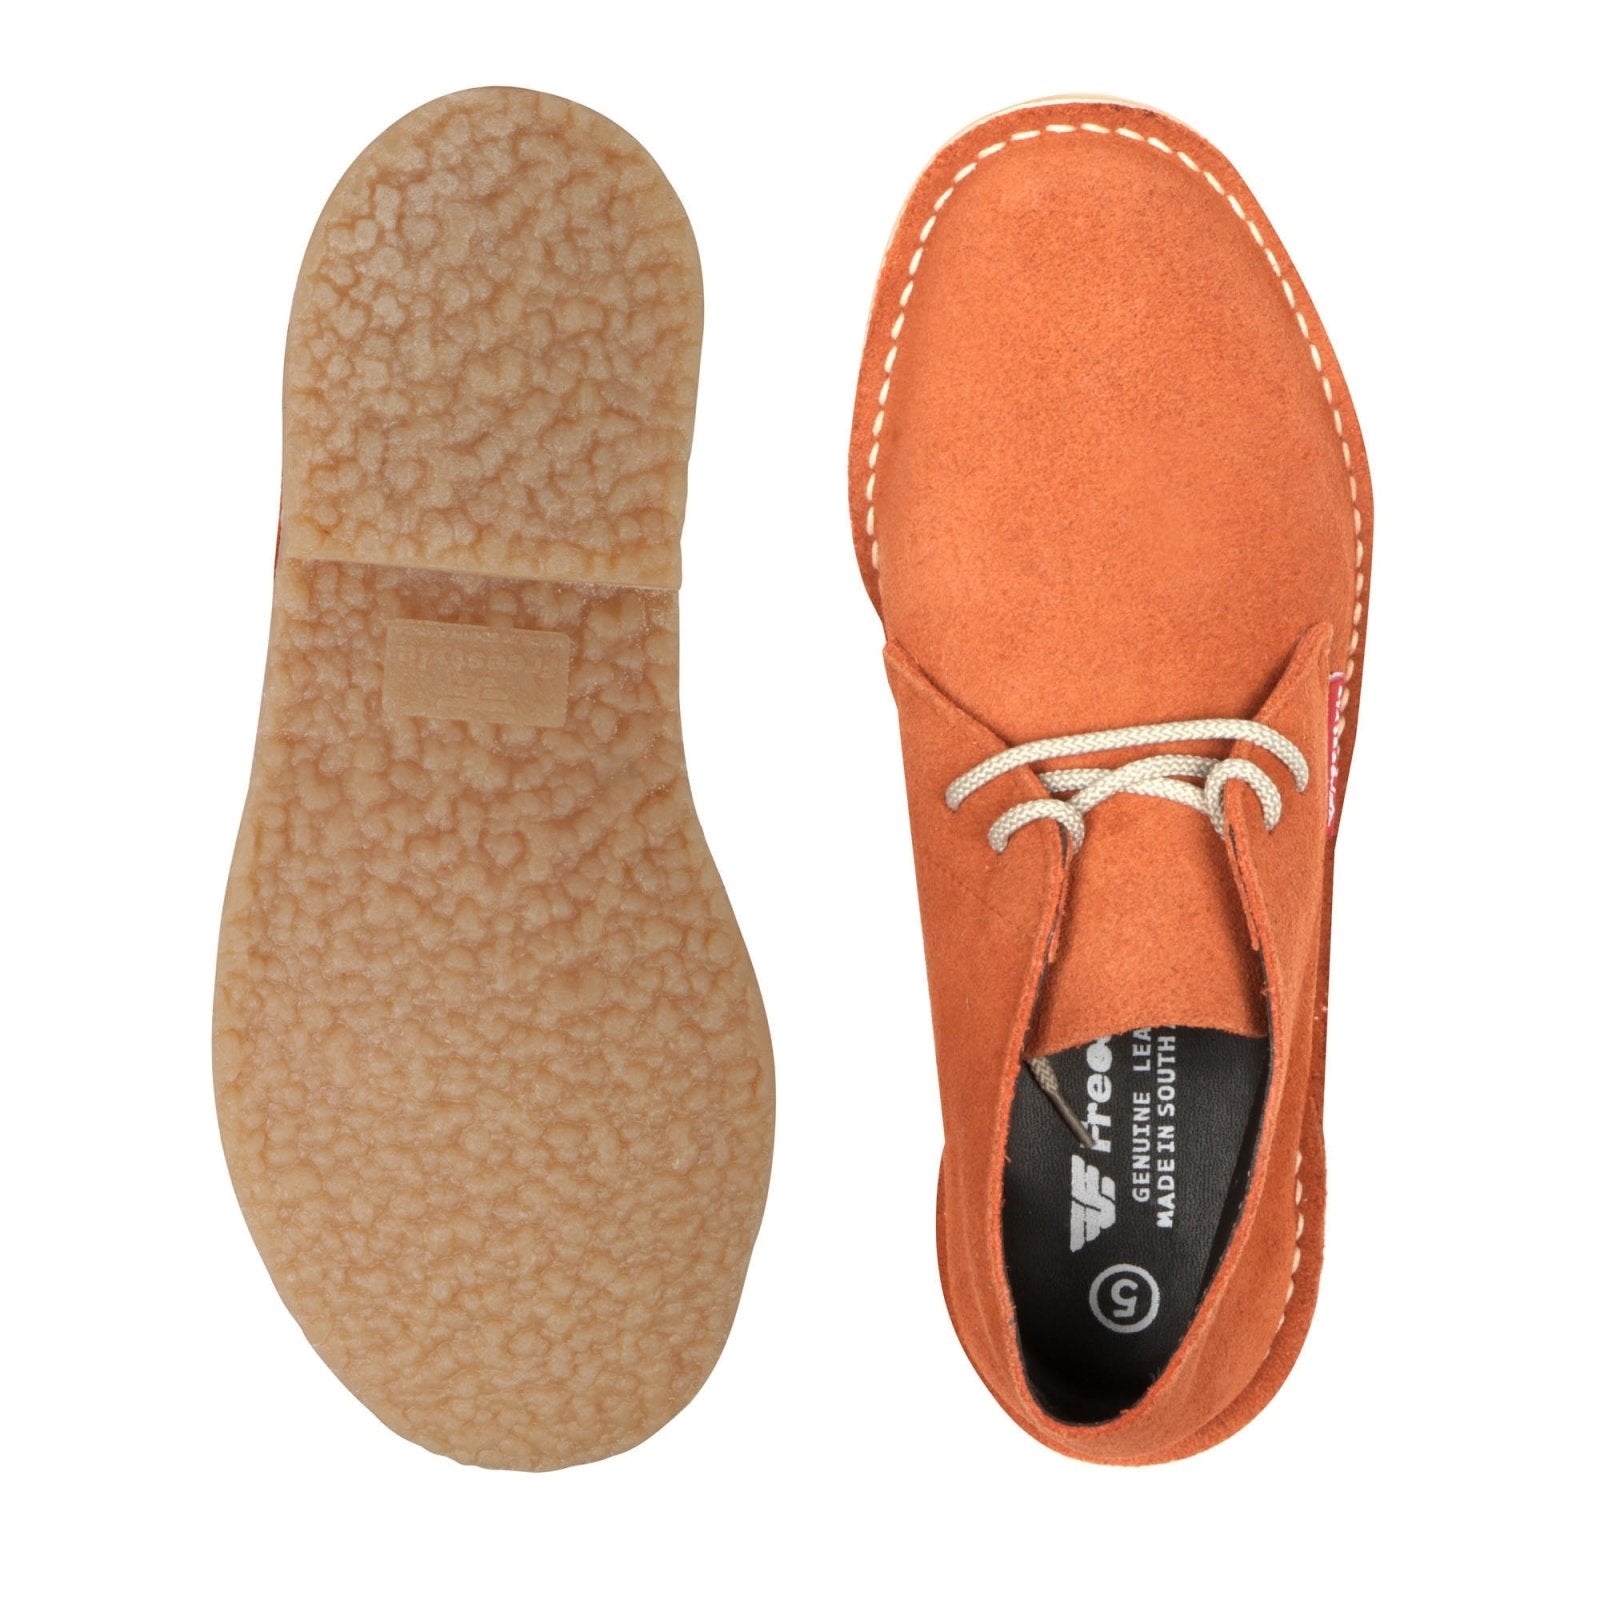 Hunter Vellie Unisex Premium Suede - Orange - Freestyle SA Proudly local vellies leather boots veldskoens vellies leather shoes suede veldskoens